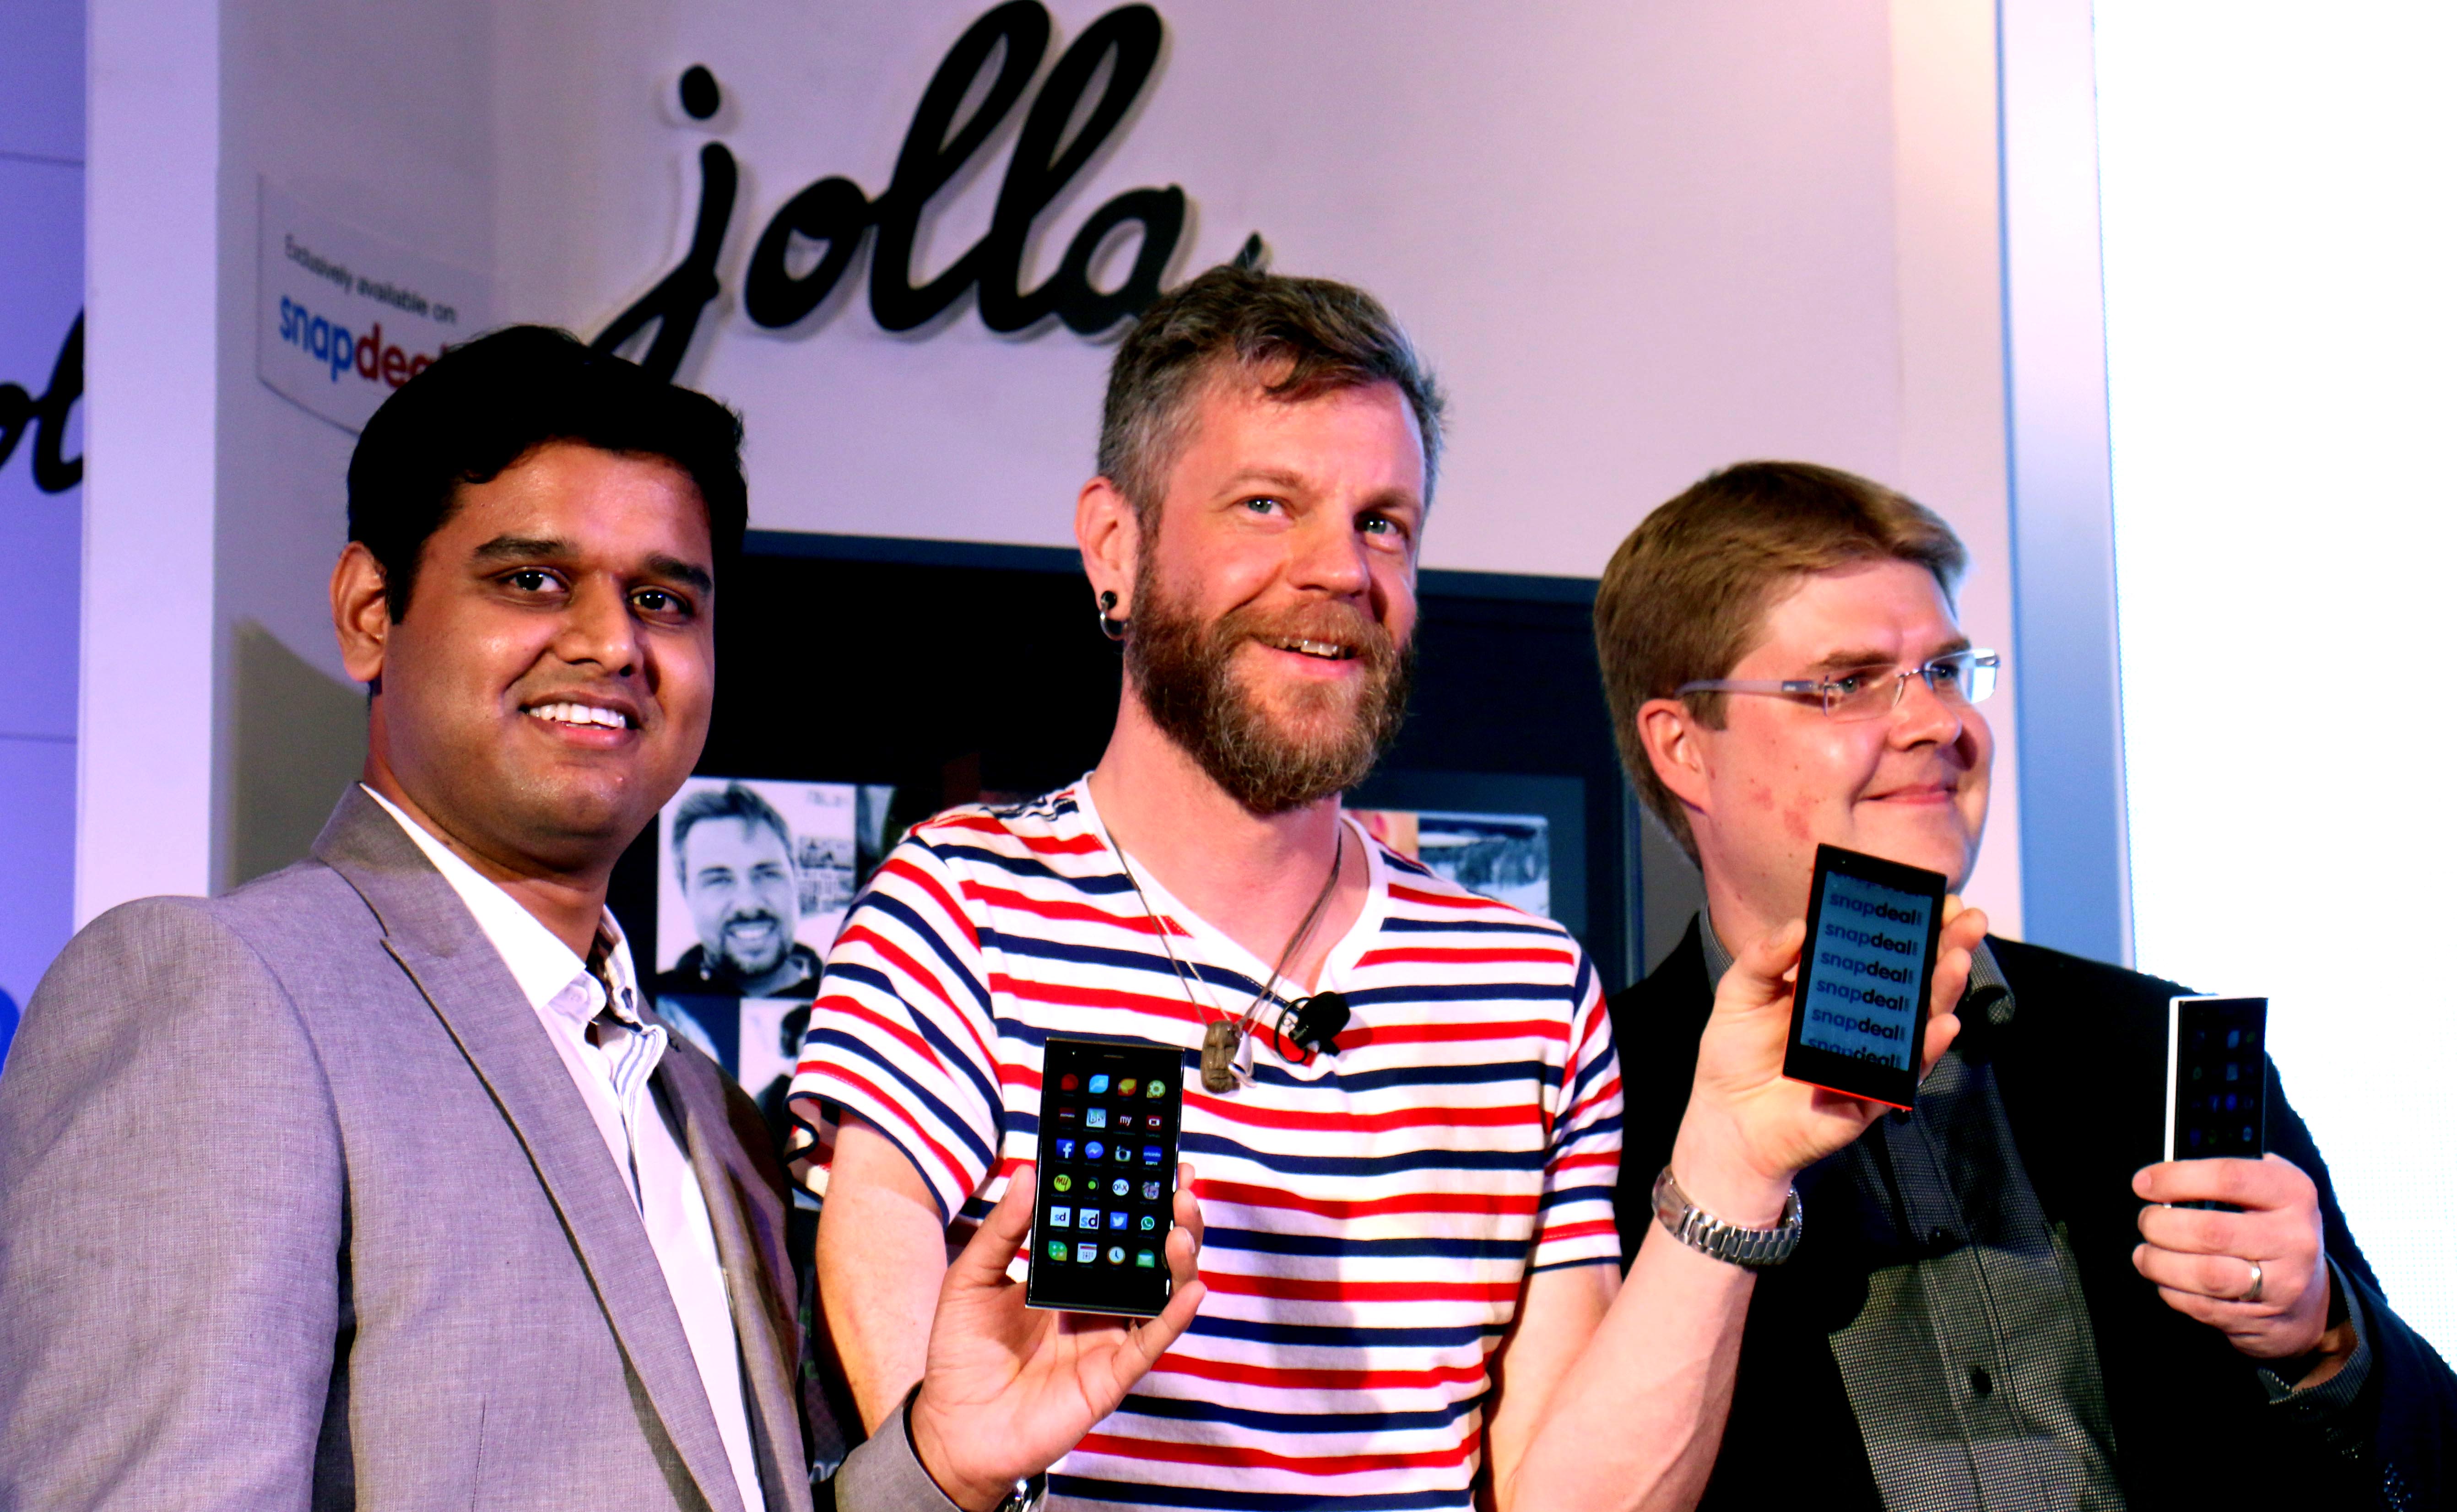 Snapdeal.com launches Jolla smartphone